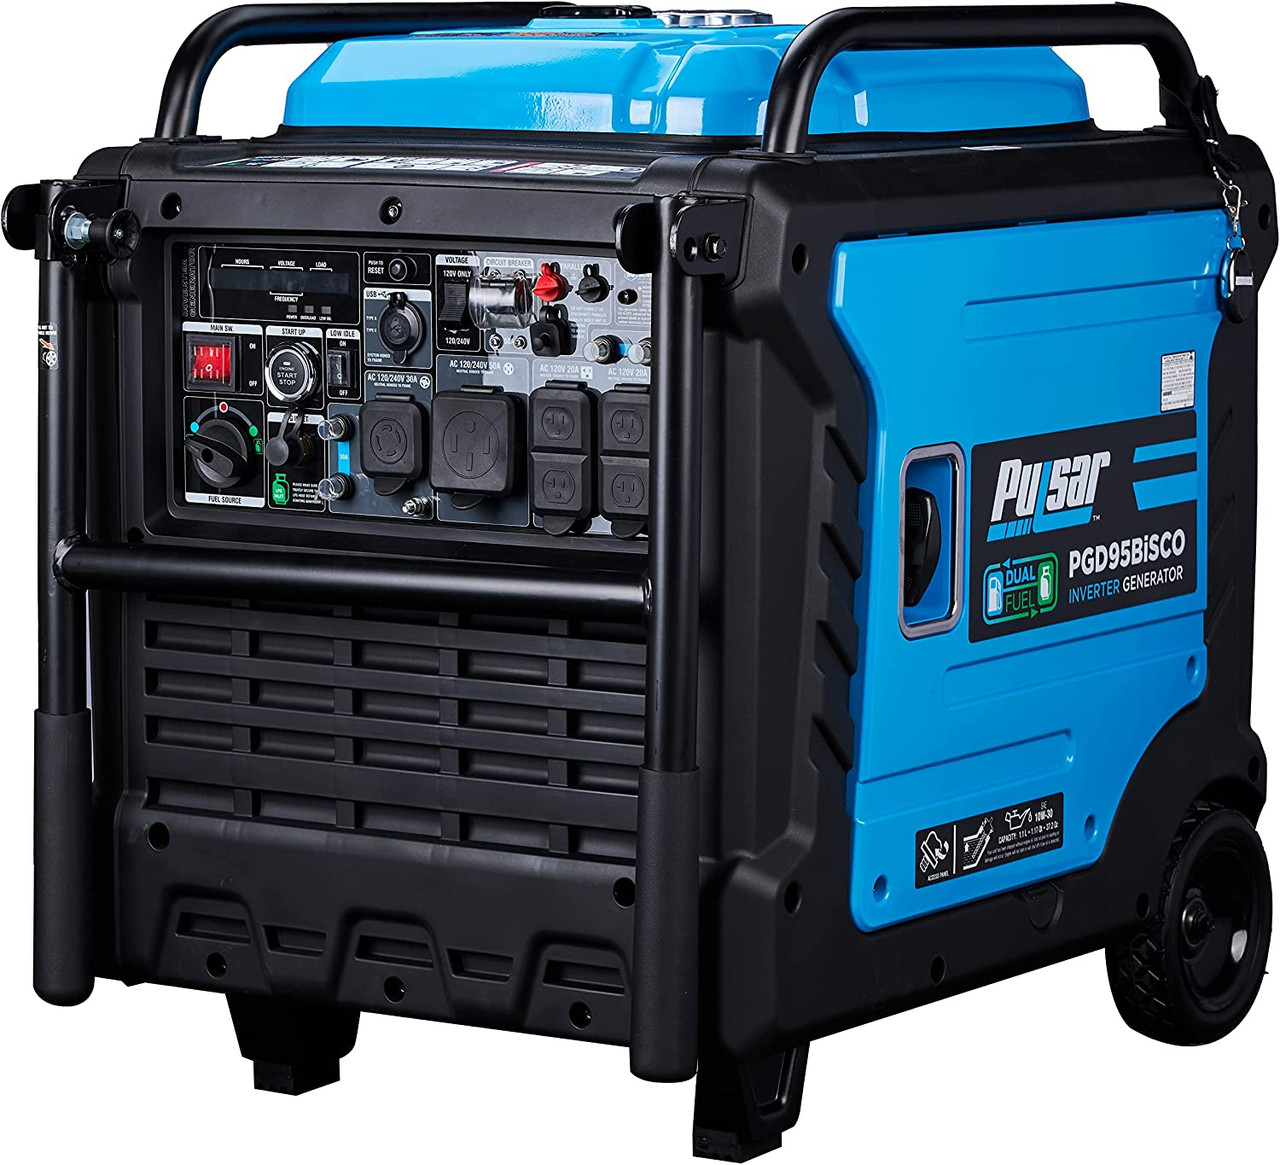 Pulsar PGD95BISCO Super Quite Dual Fuel 9500W Home Use Backup Portable Inverter Generator With Remote Control and electric start (CO, low battery and low oil Shutoff), RV ready